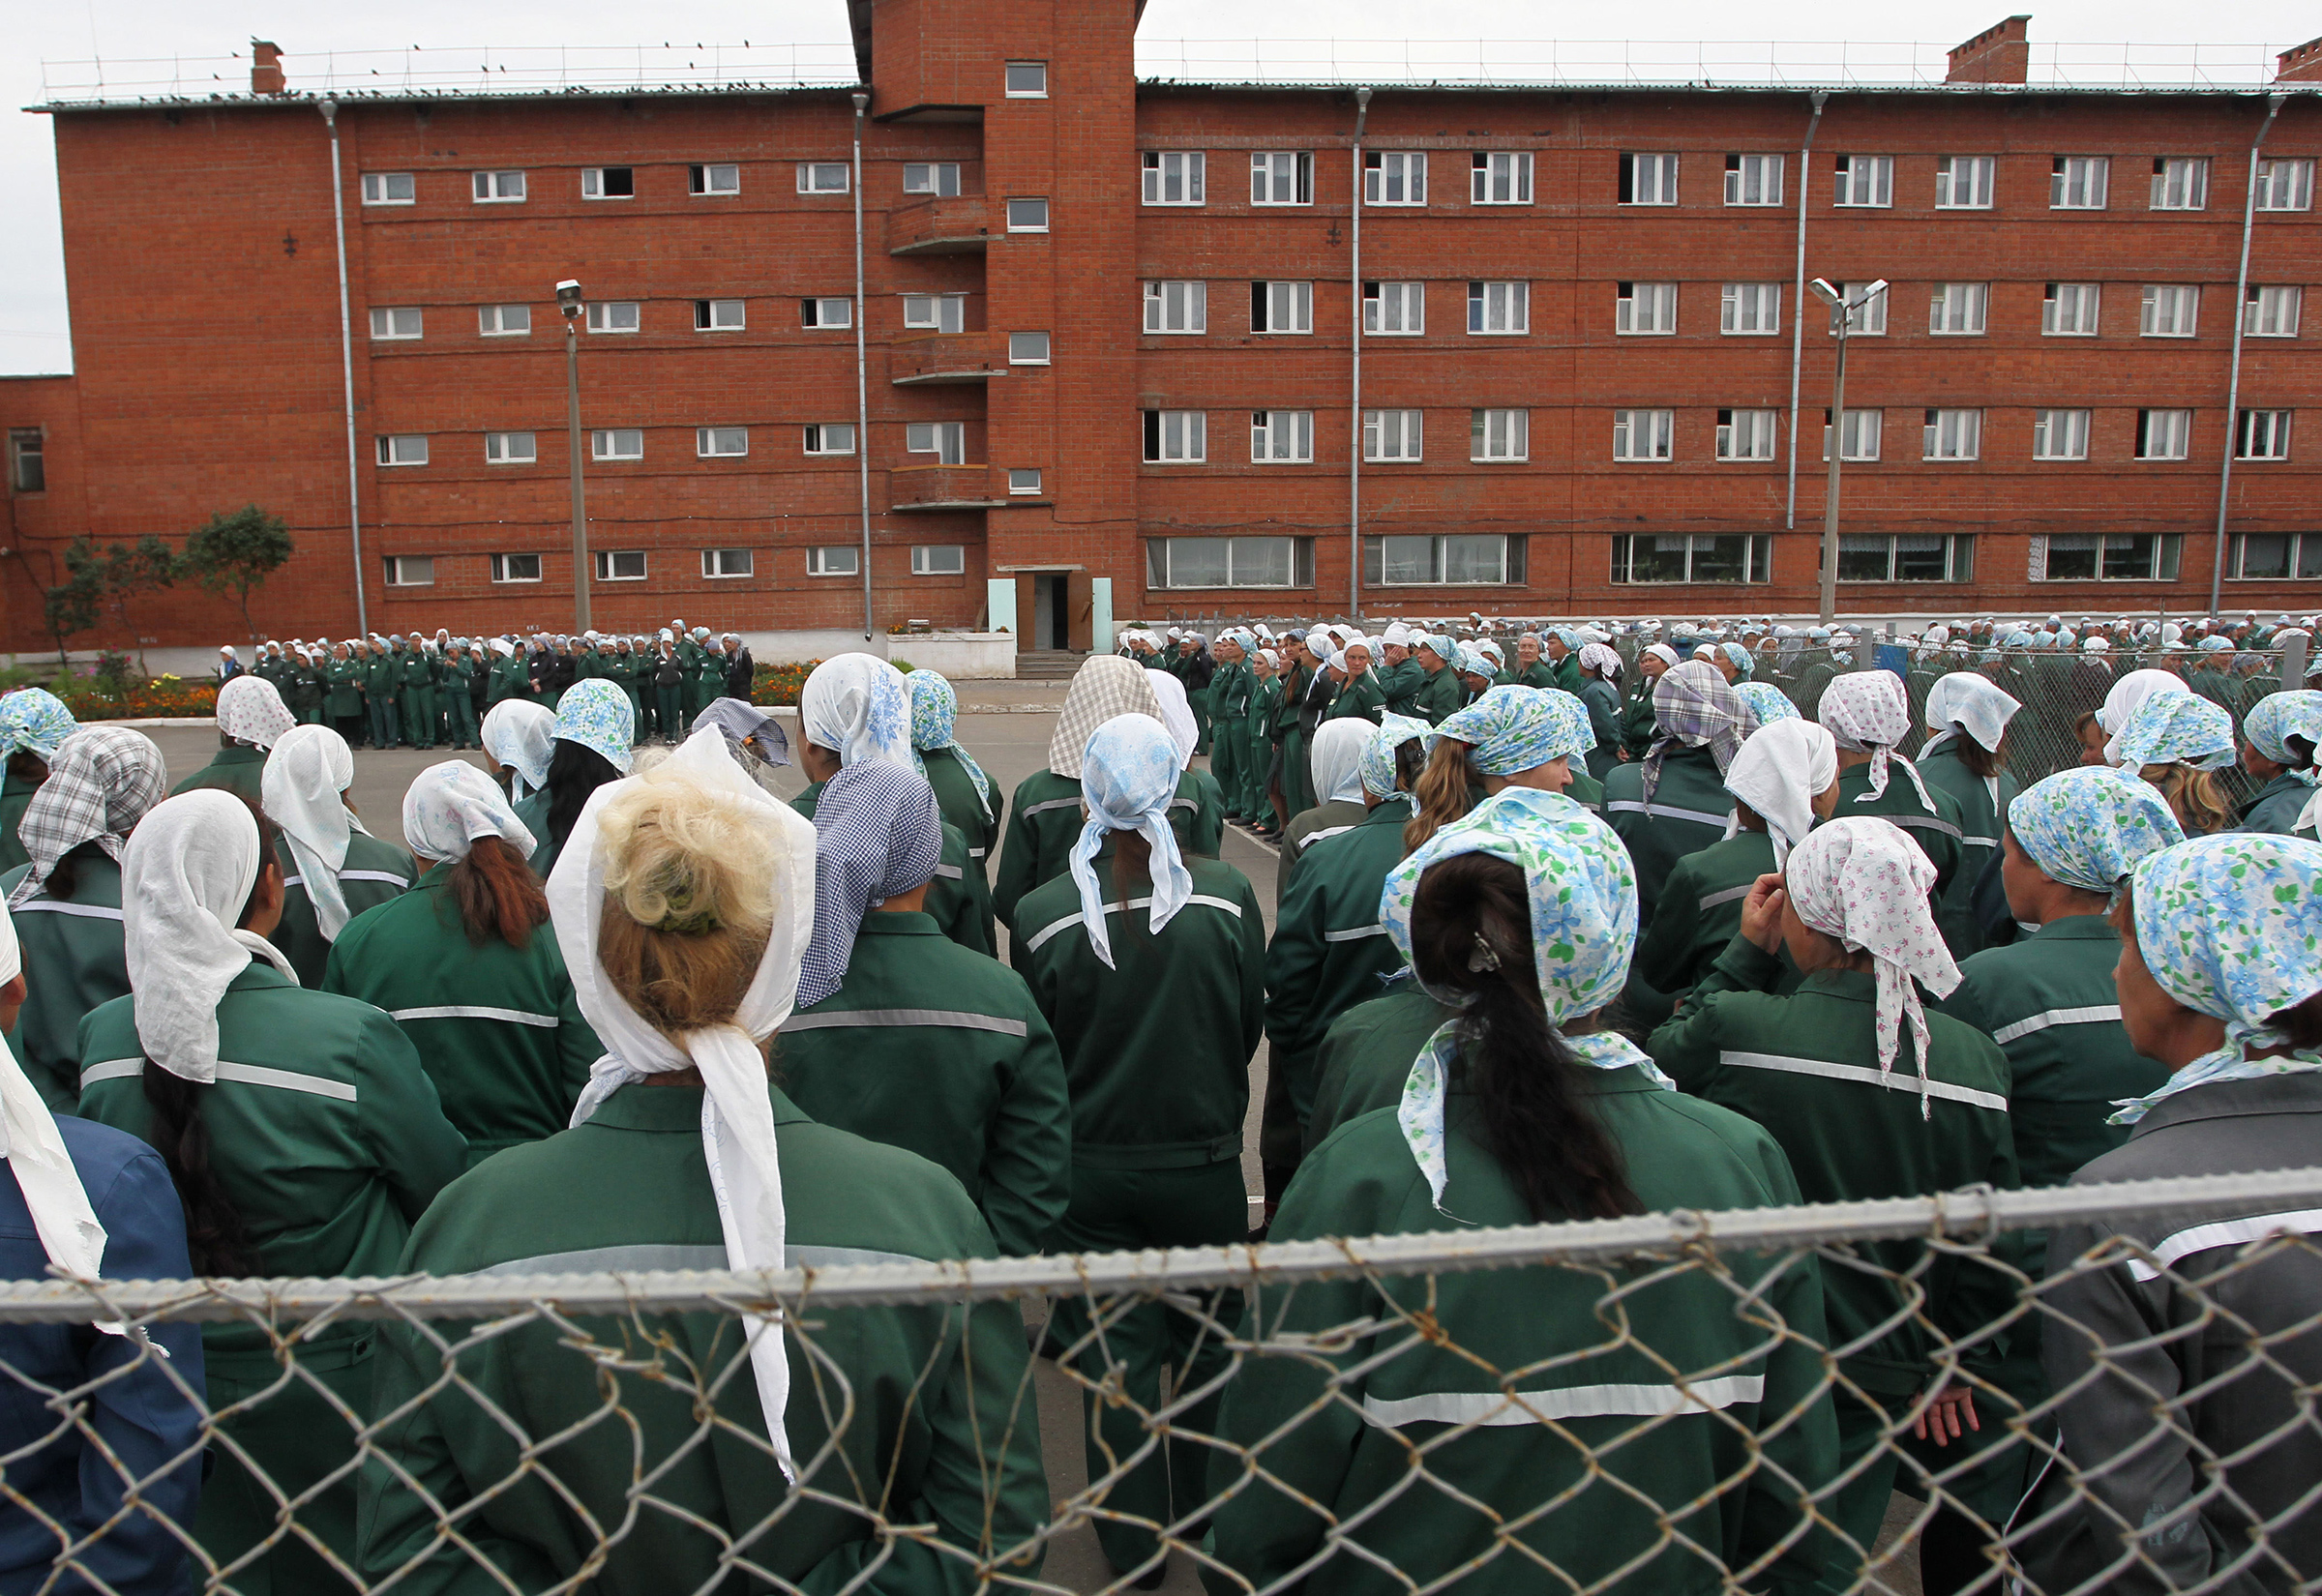 Imprisoned women stand during a morning inspection at a women's prison in a town of Sarapul, central Russia, in August 2012. (Yuri Tutov—AP)